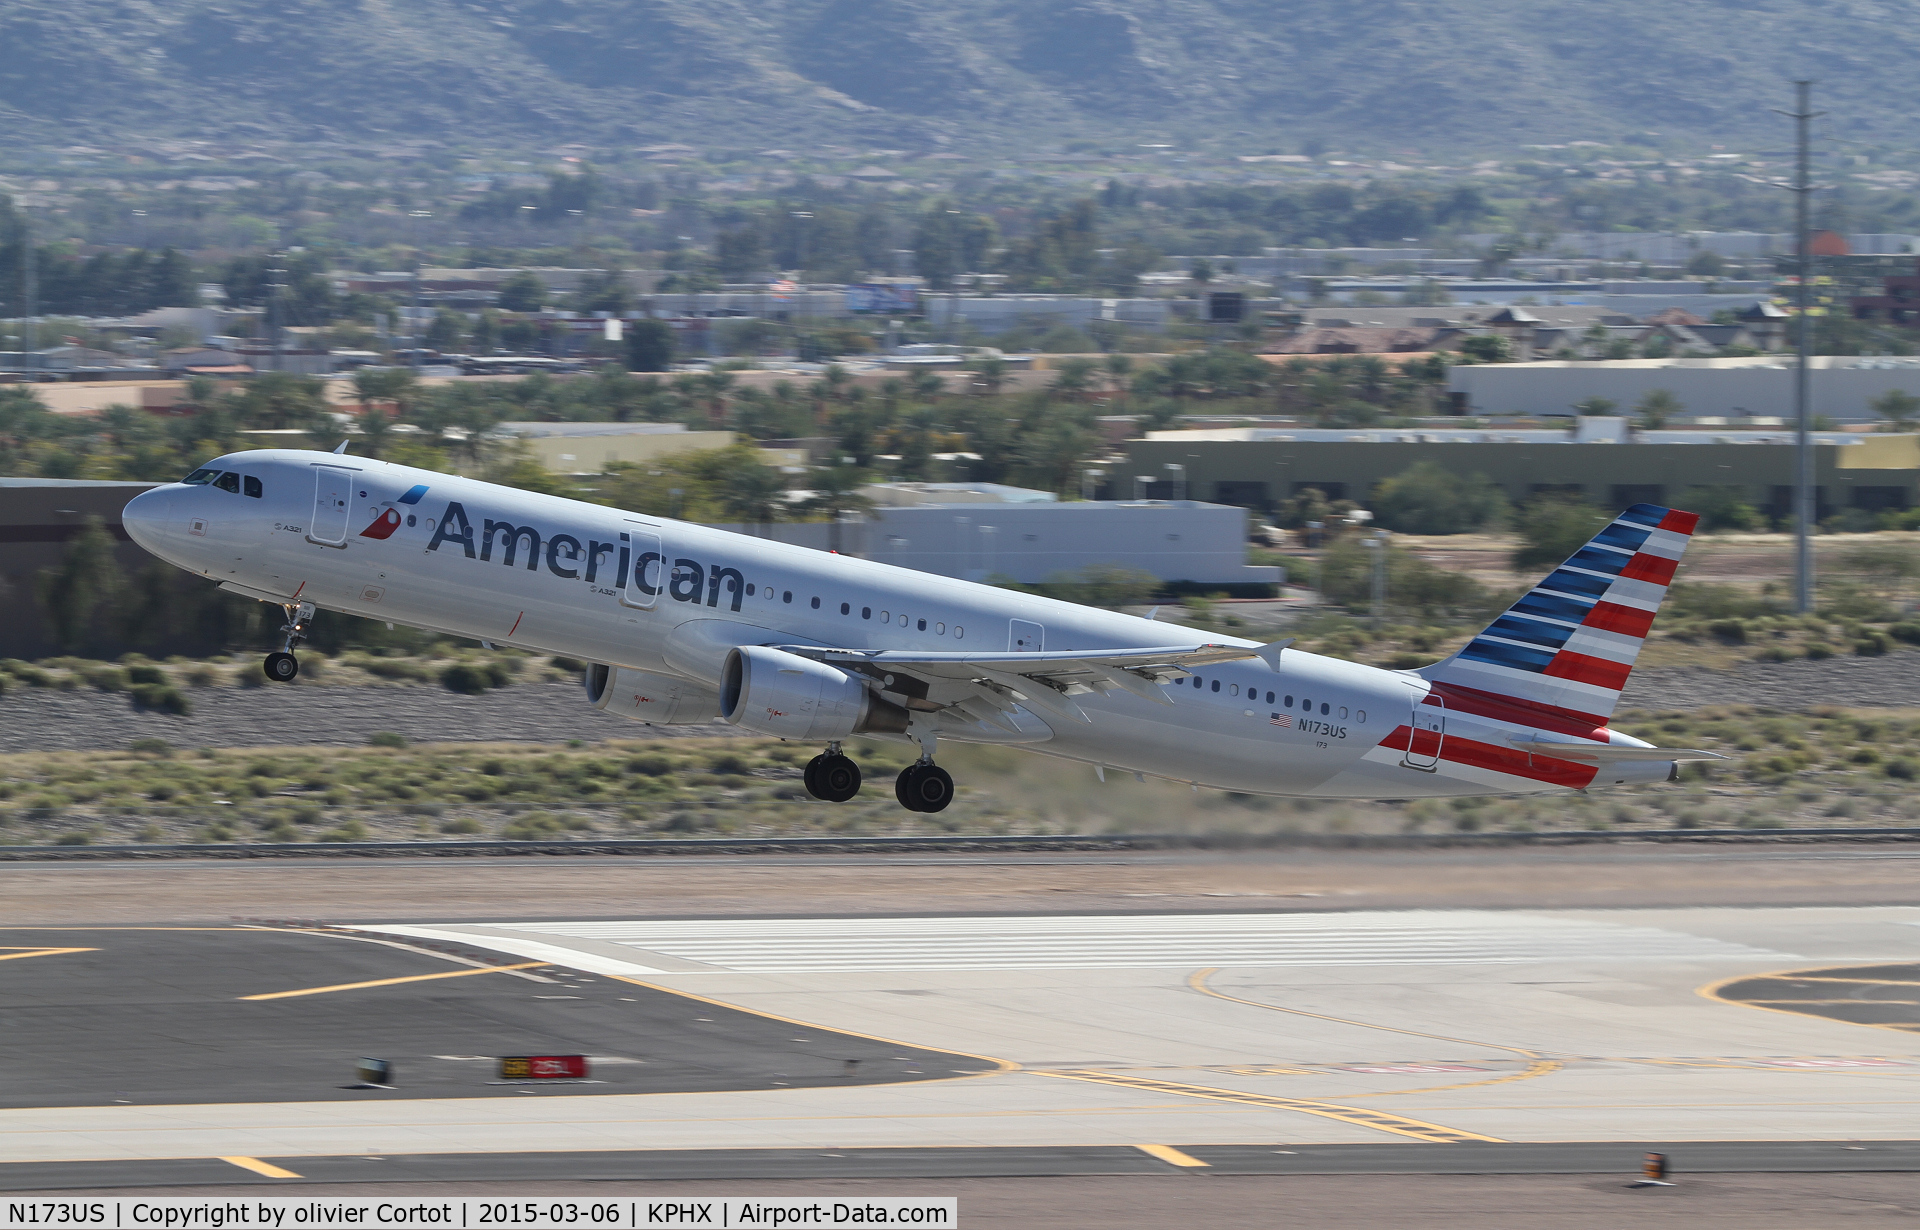 N173US, 2001 Airbus A321-211 C/N 1481, Taking off from Phoenix airport